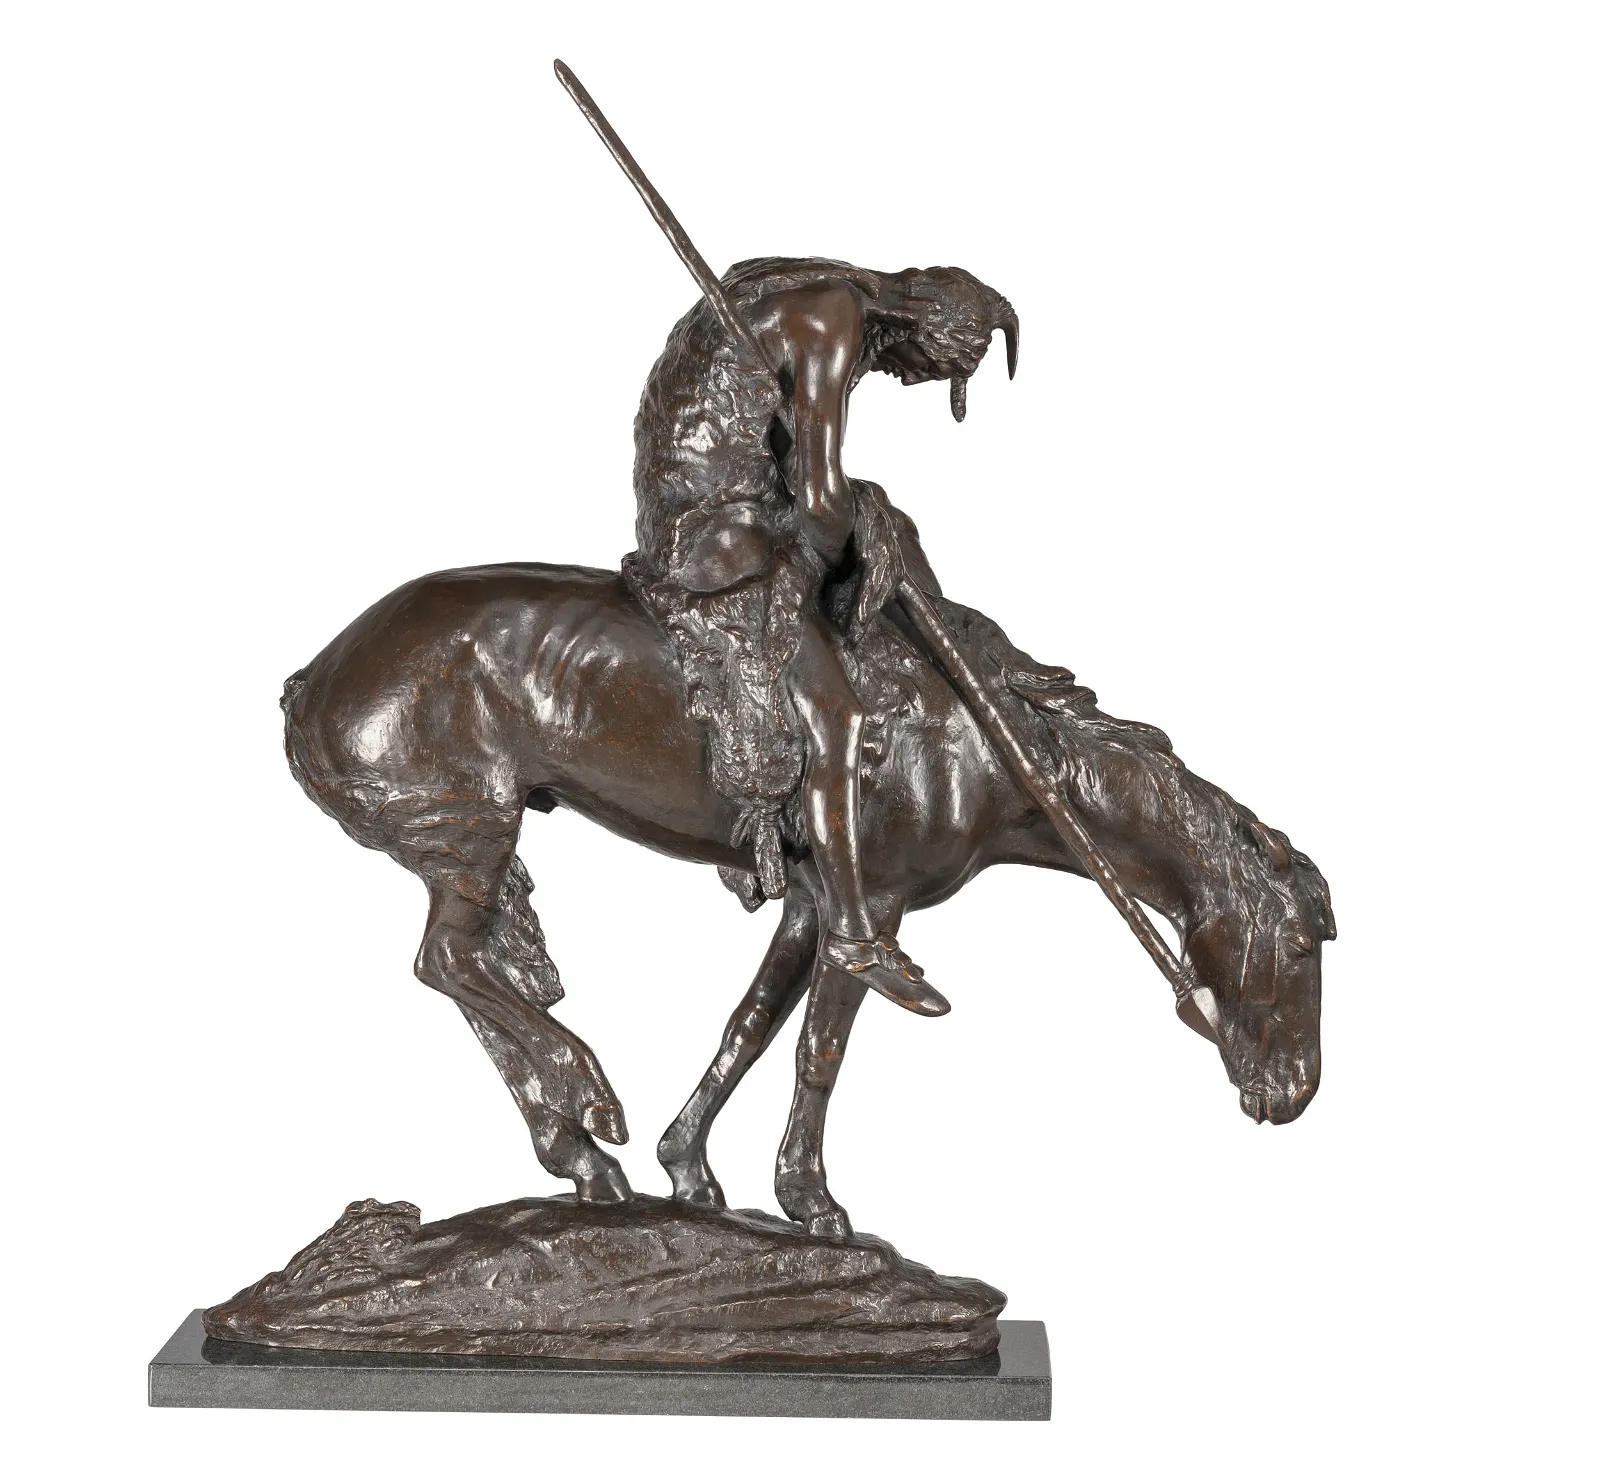 James Earle Fraser – End of the Trail